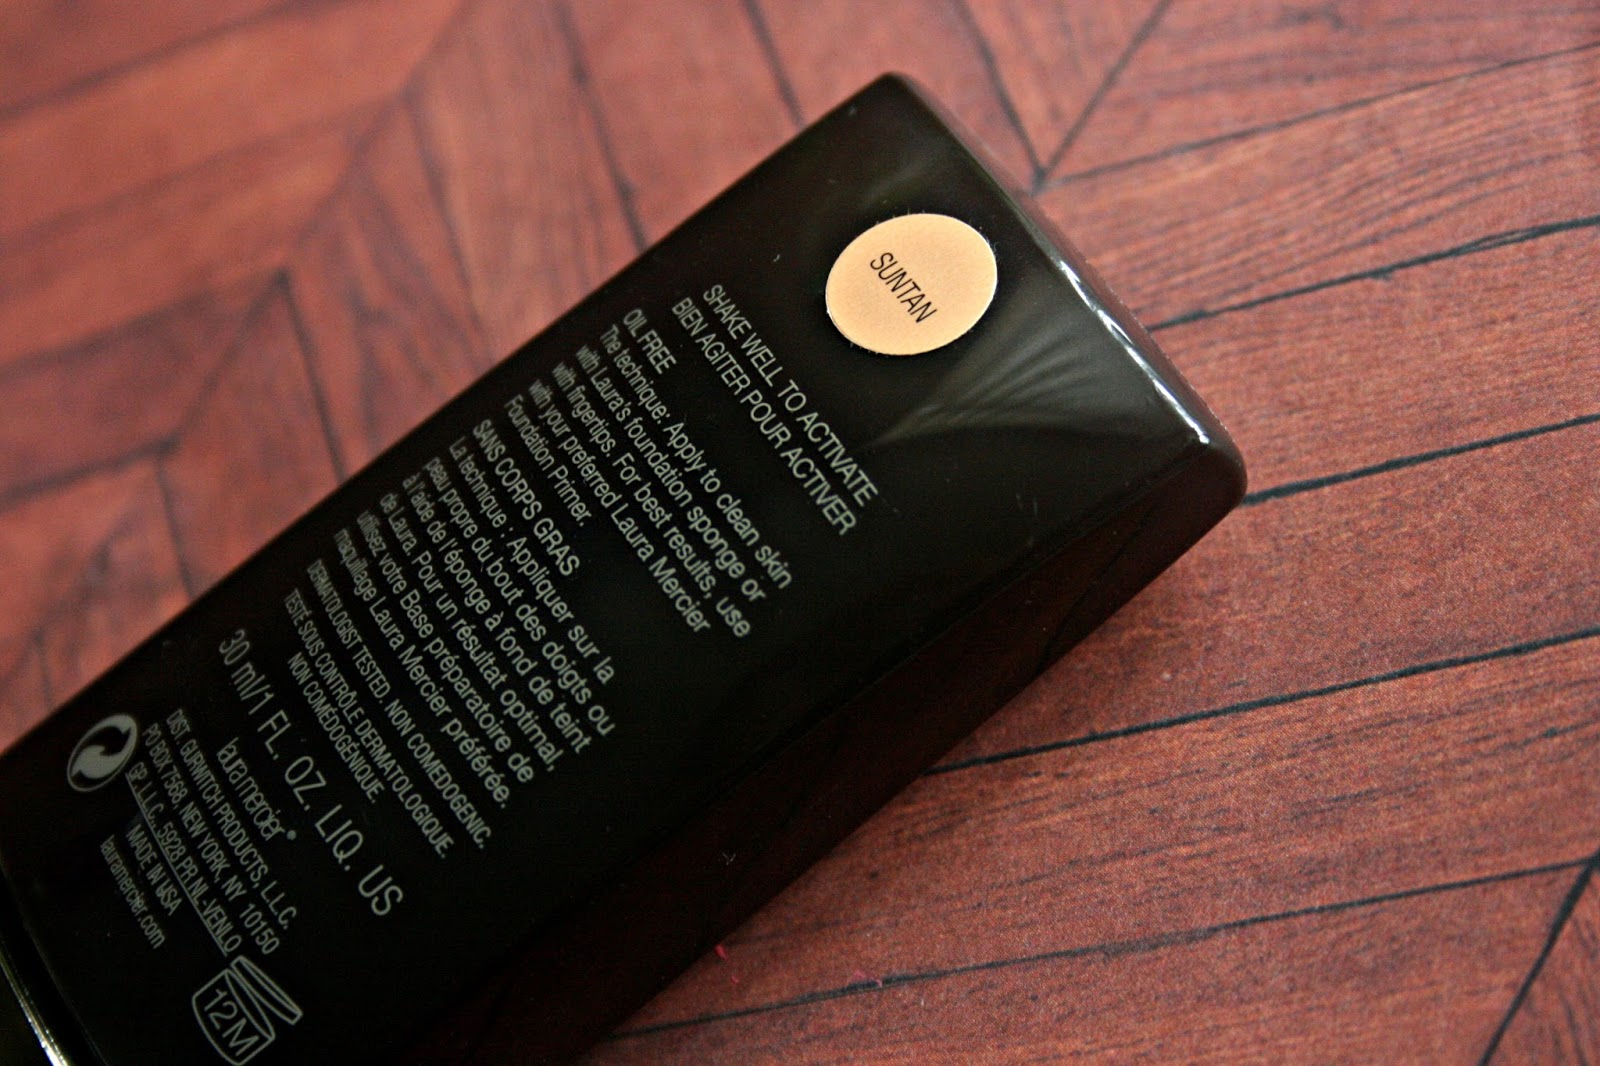 Laura Mercier Smooth Finish Flawless Fluide Suntan Review, Photos & Swatches